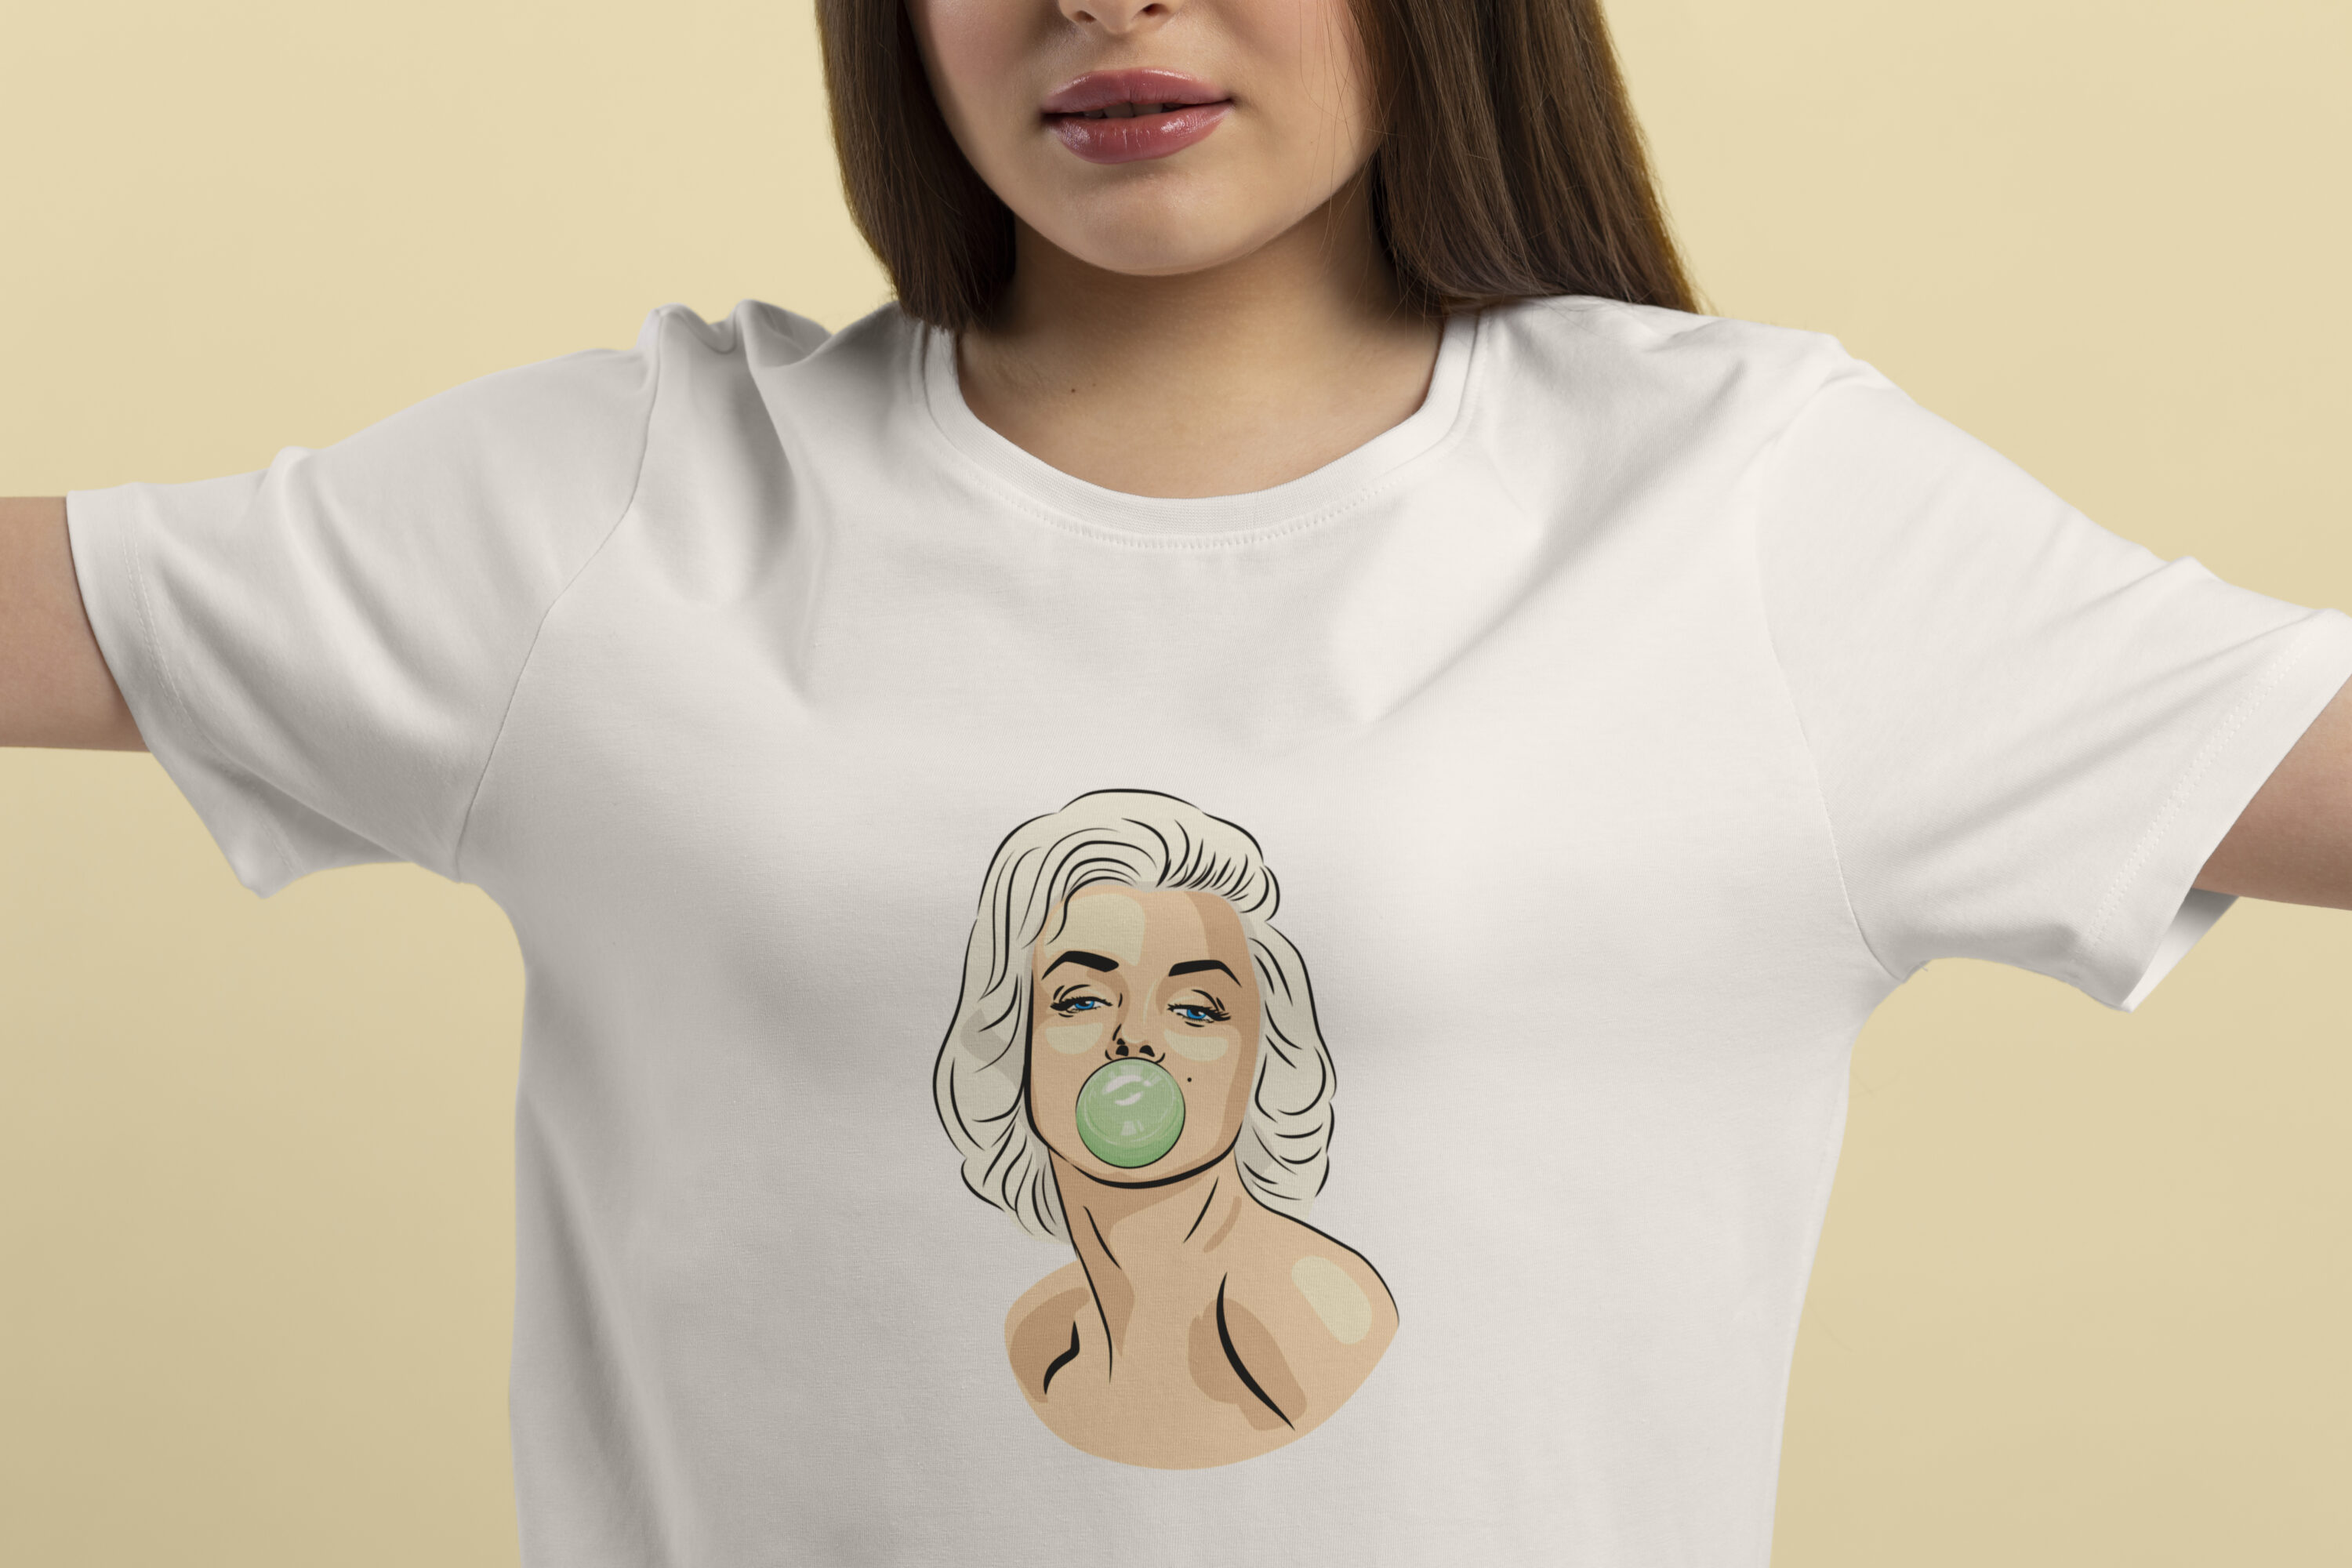 Image of white t-shirts with irresistible print of Marilyn Monroe with bubble gum.